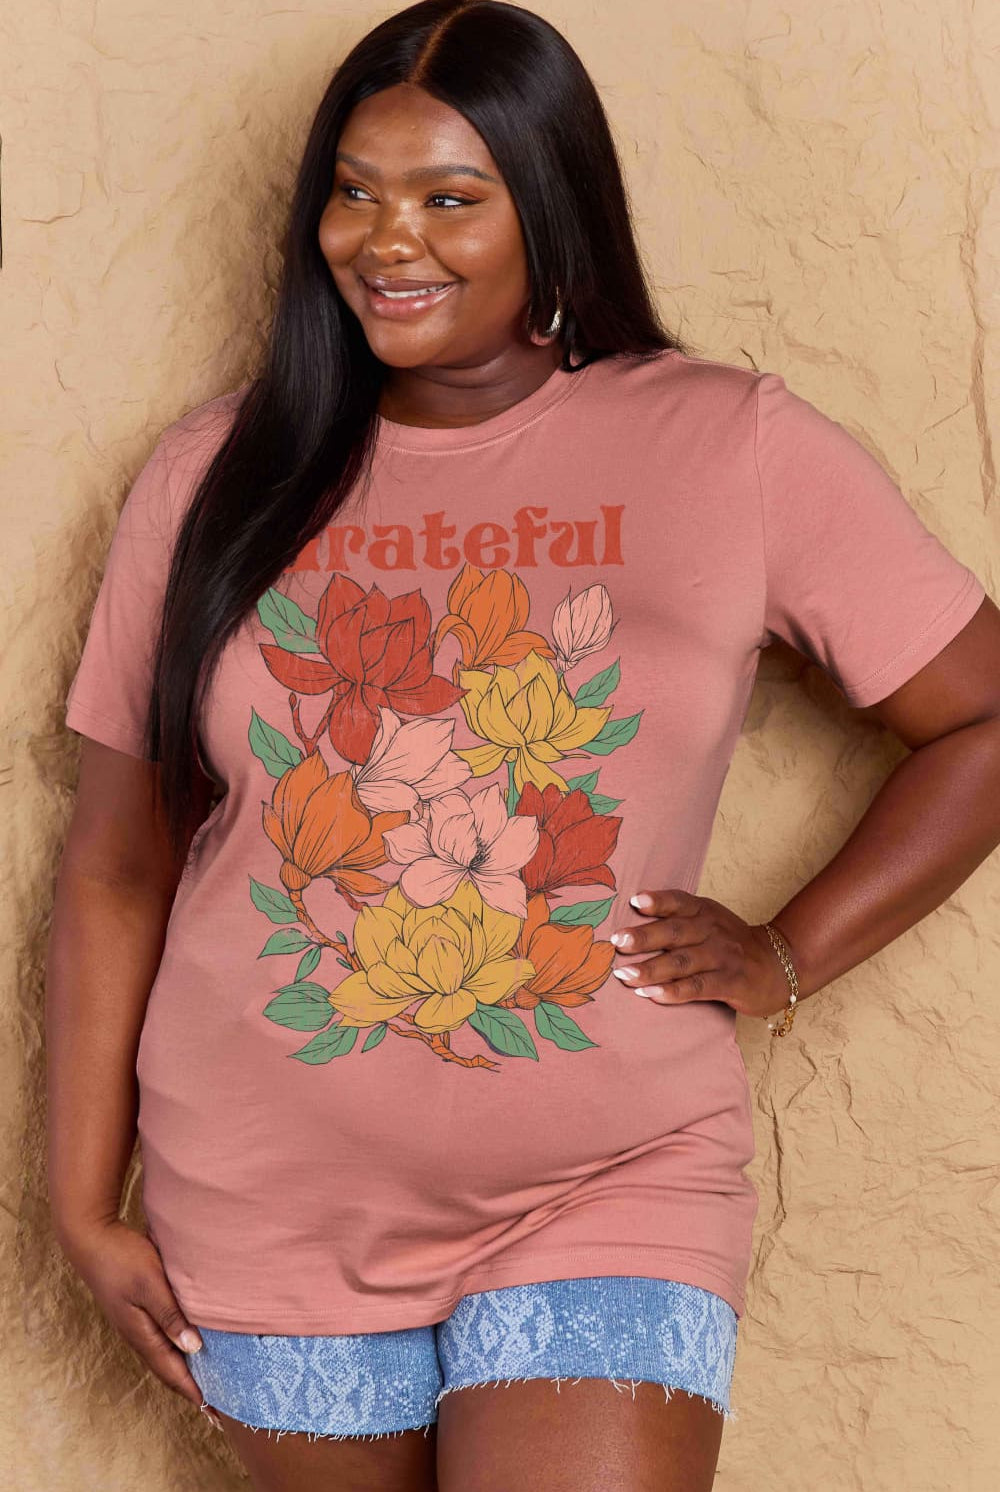 Rosy Brown Simply Love Full Size GRATEFUL Flower Graphic Cotton T-Shirt Graphic Tees